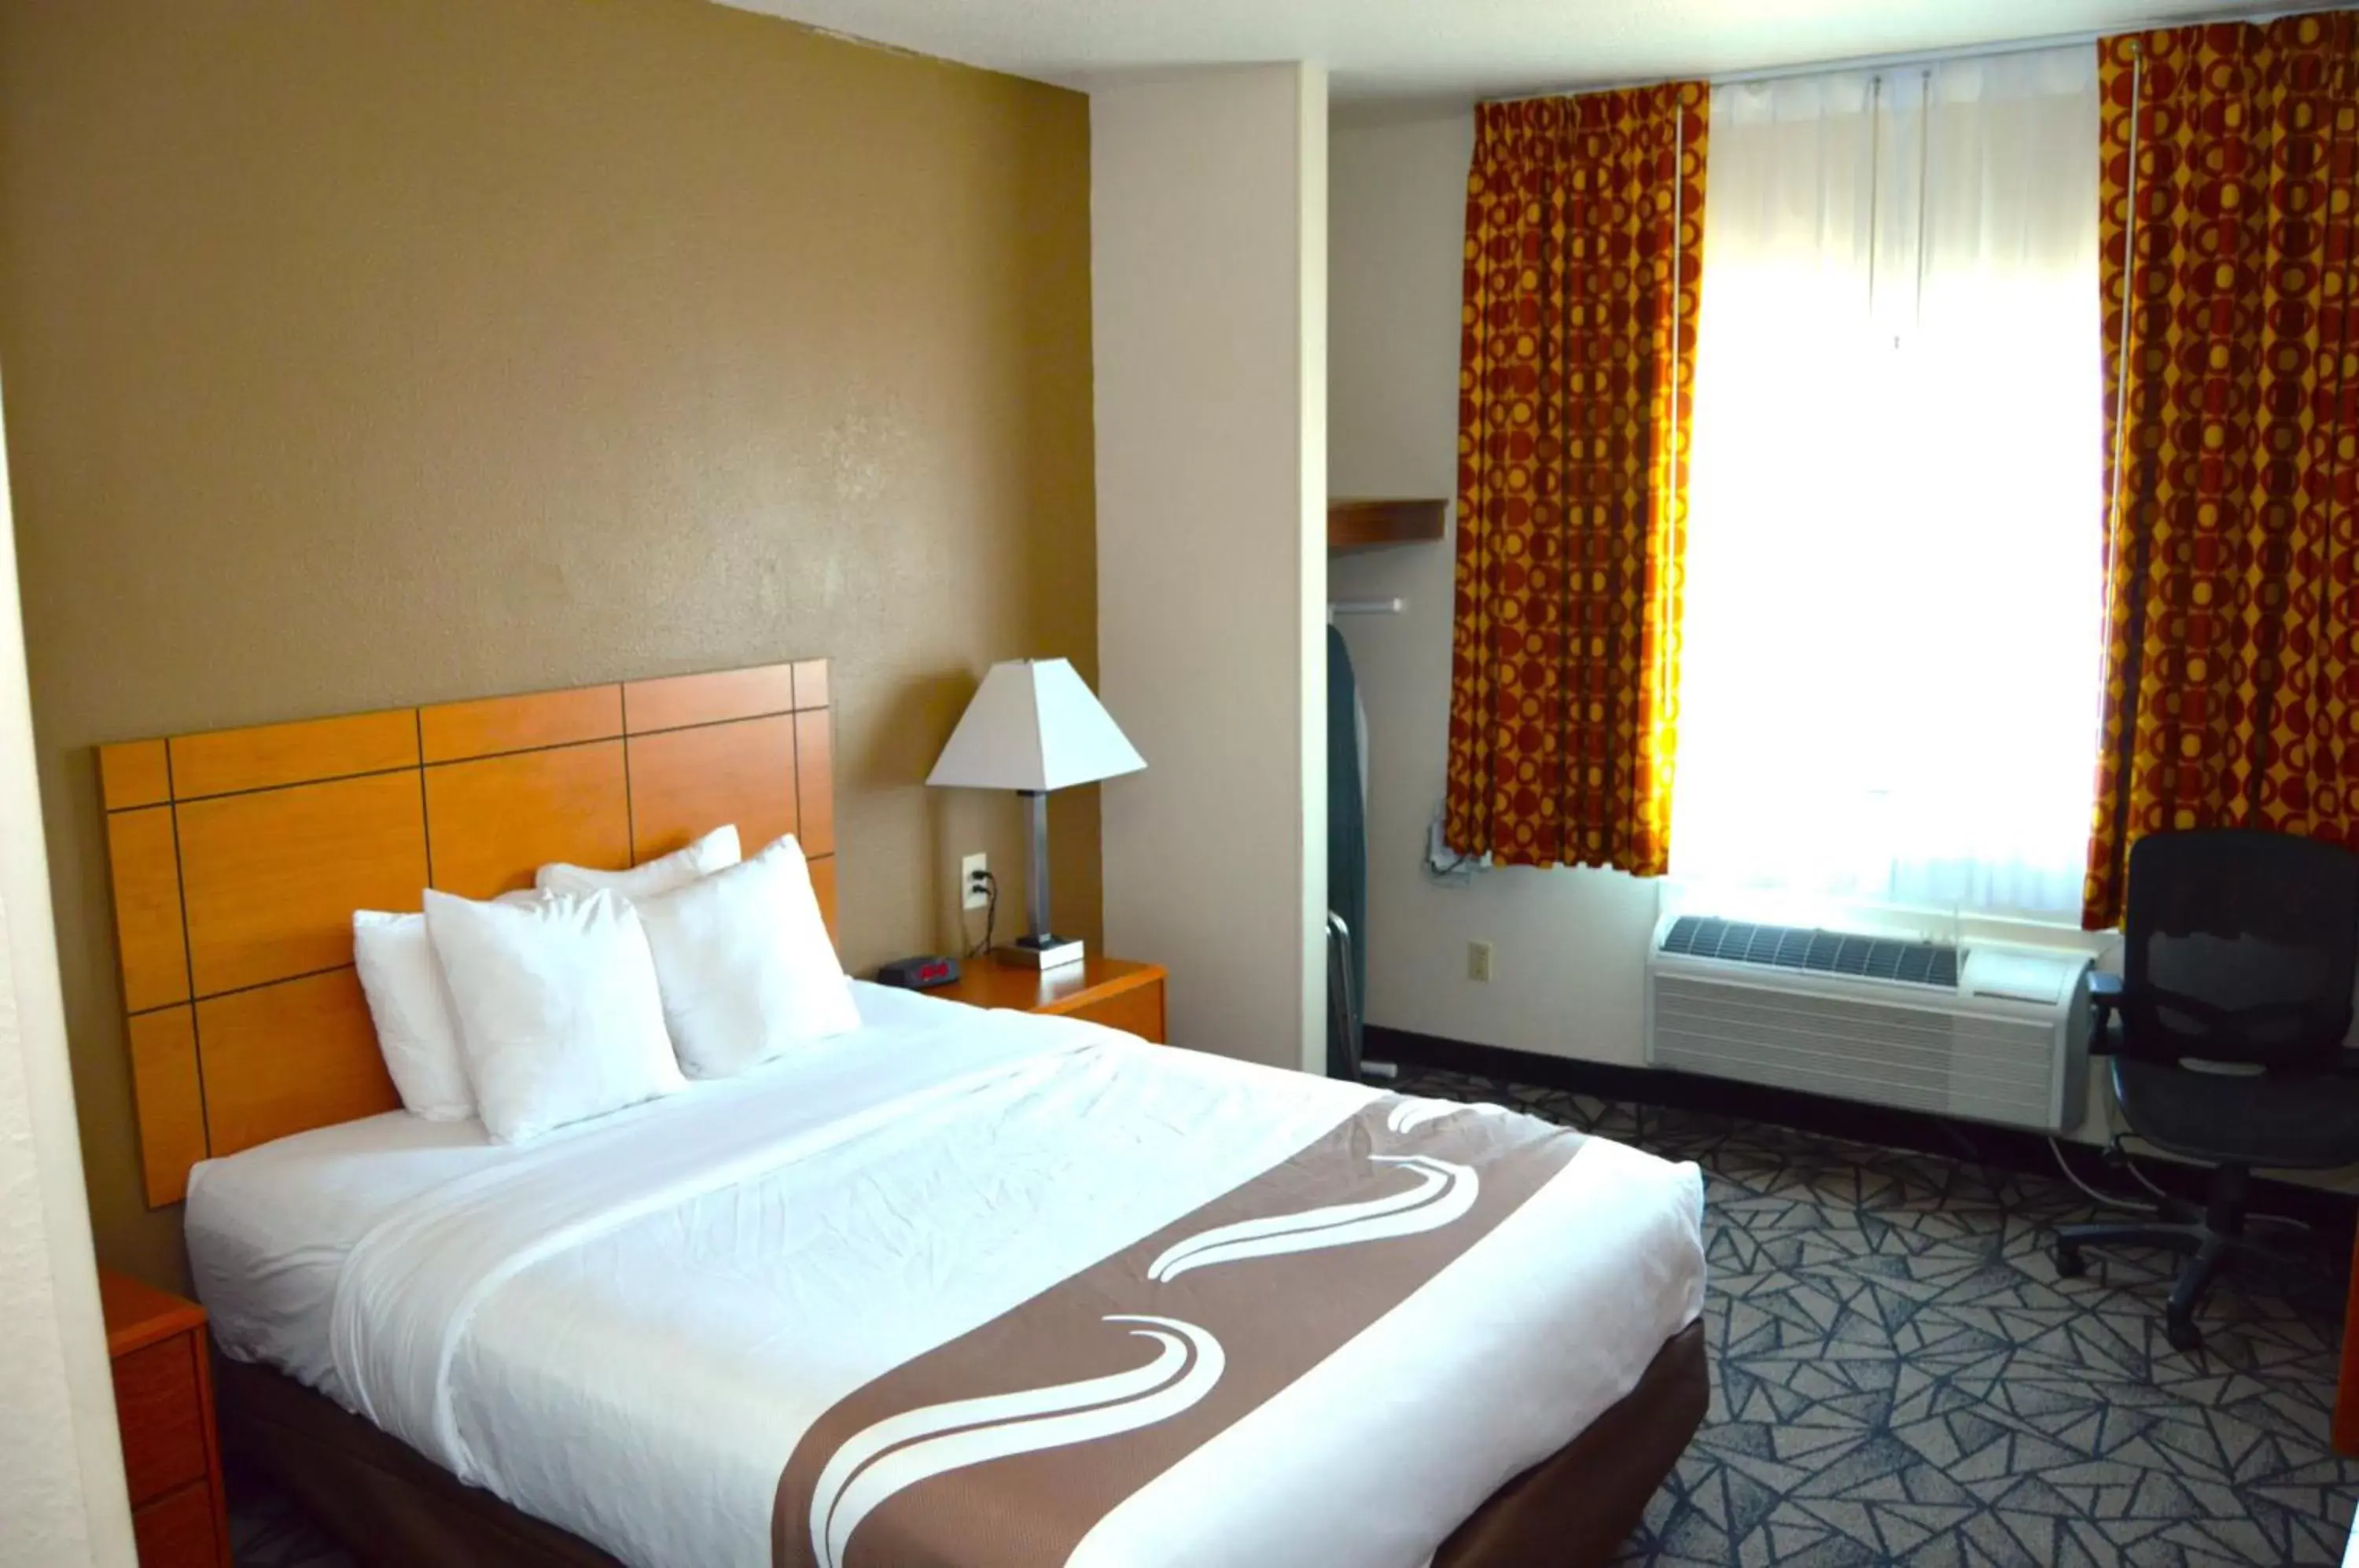 Bedroom, Bed in Quality Inn - Coralville